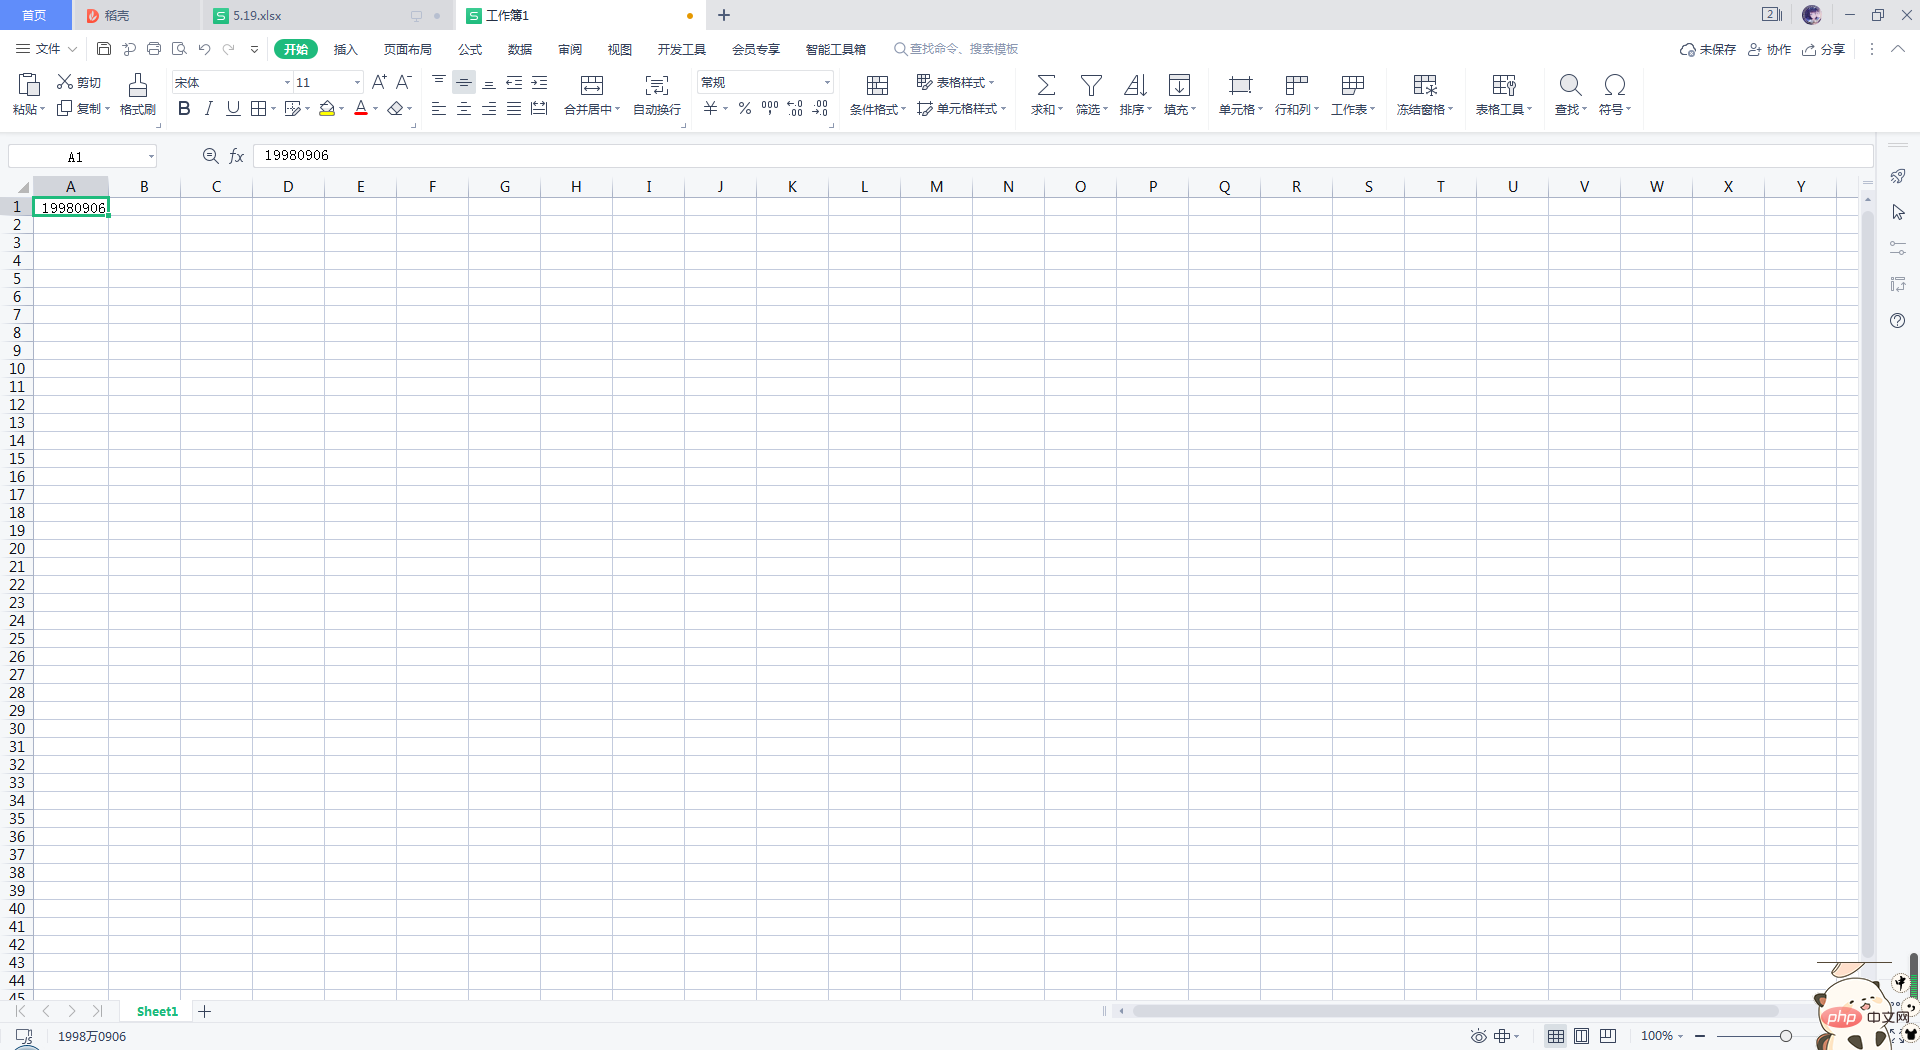 How to convert excel numbers into text